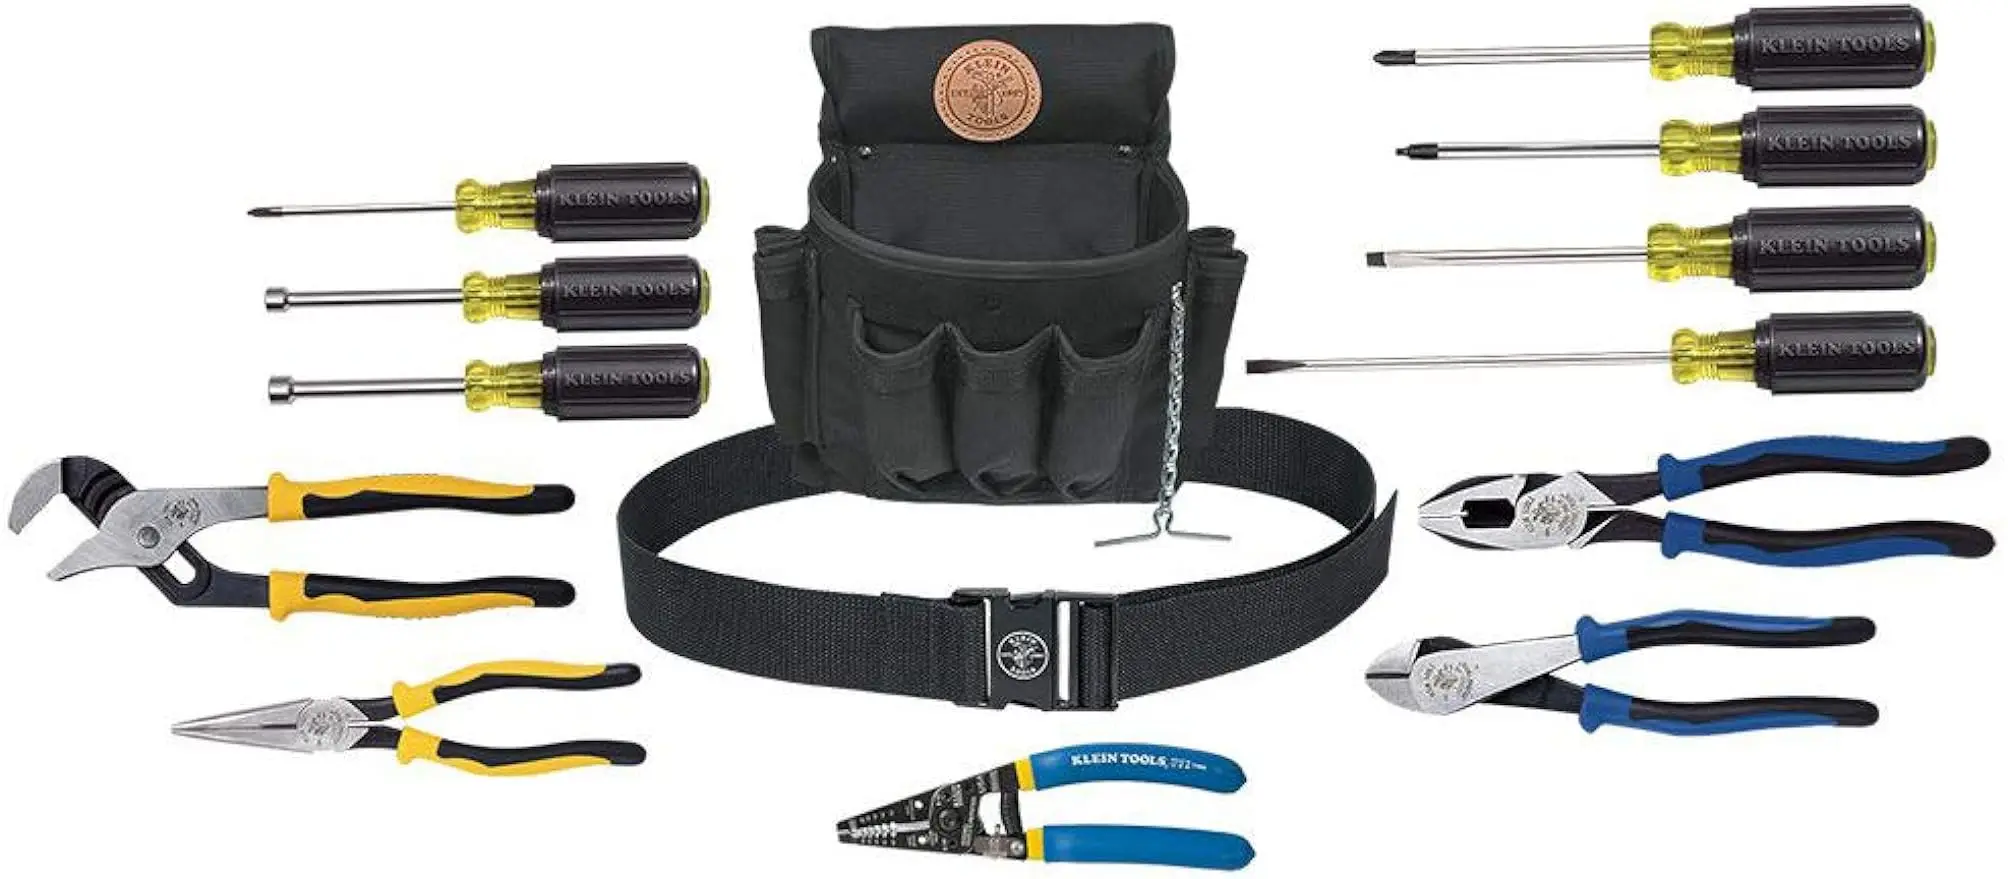 Klein Tools 92914 Tool Kit, Tool Set Includes Basic Tools, Pouch and Belt for Journeyman, Linesman, Professionals and Homeowners